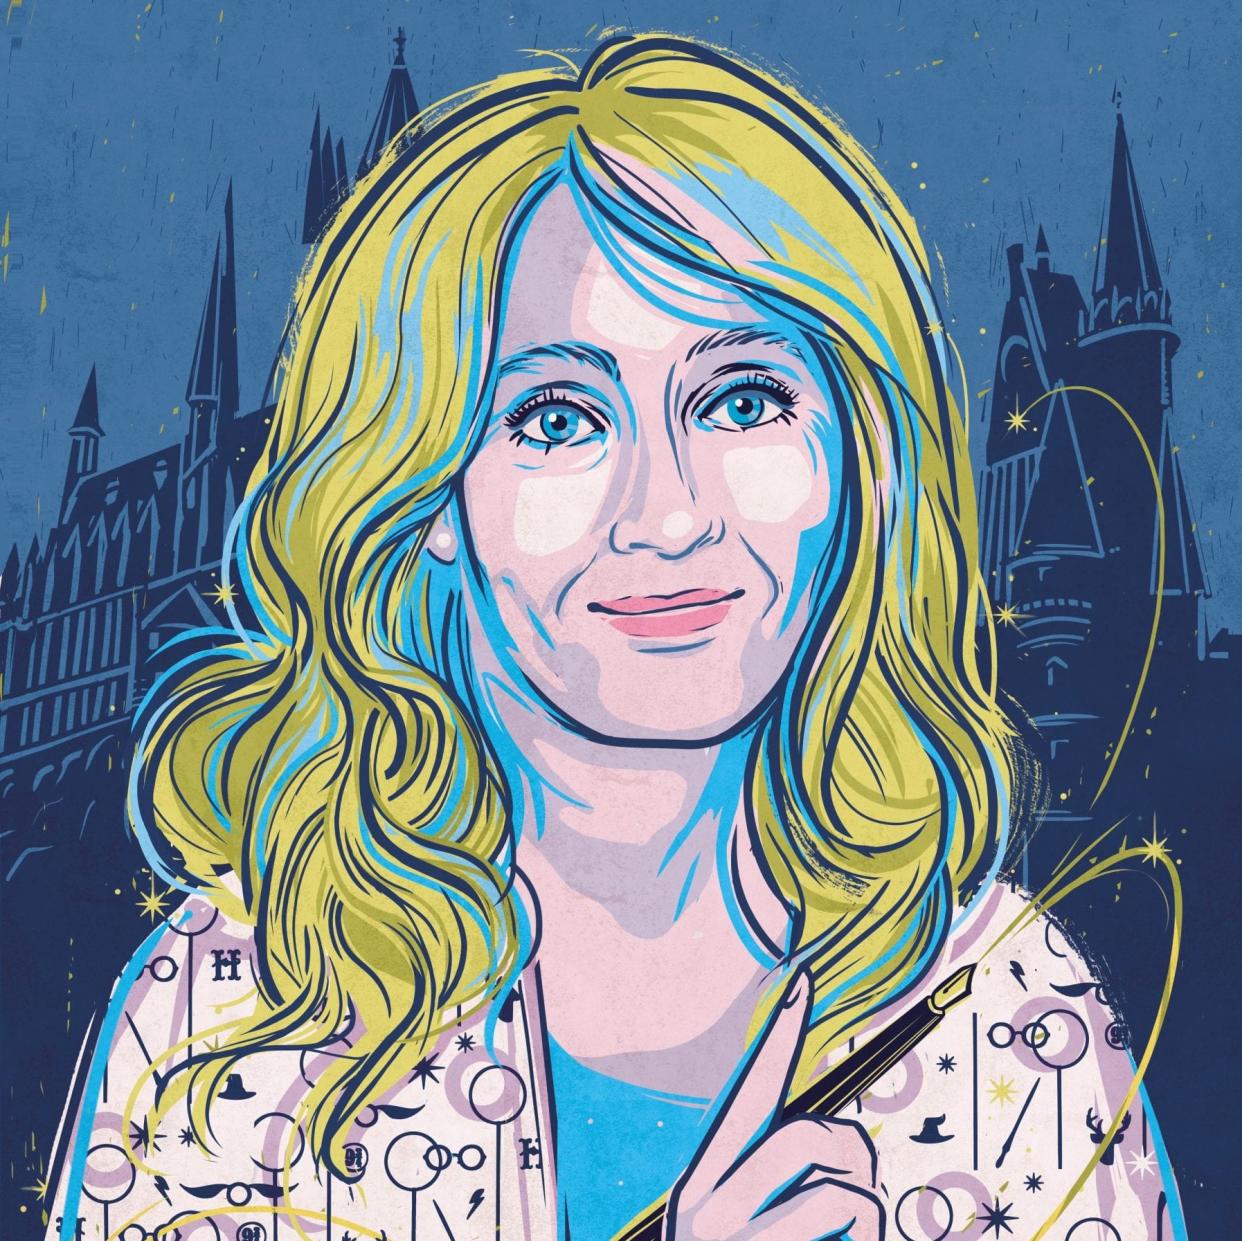 J K Rowling features in Good Night Stories for Rebel Girls, Volume 2